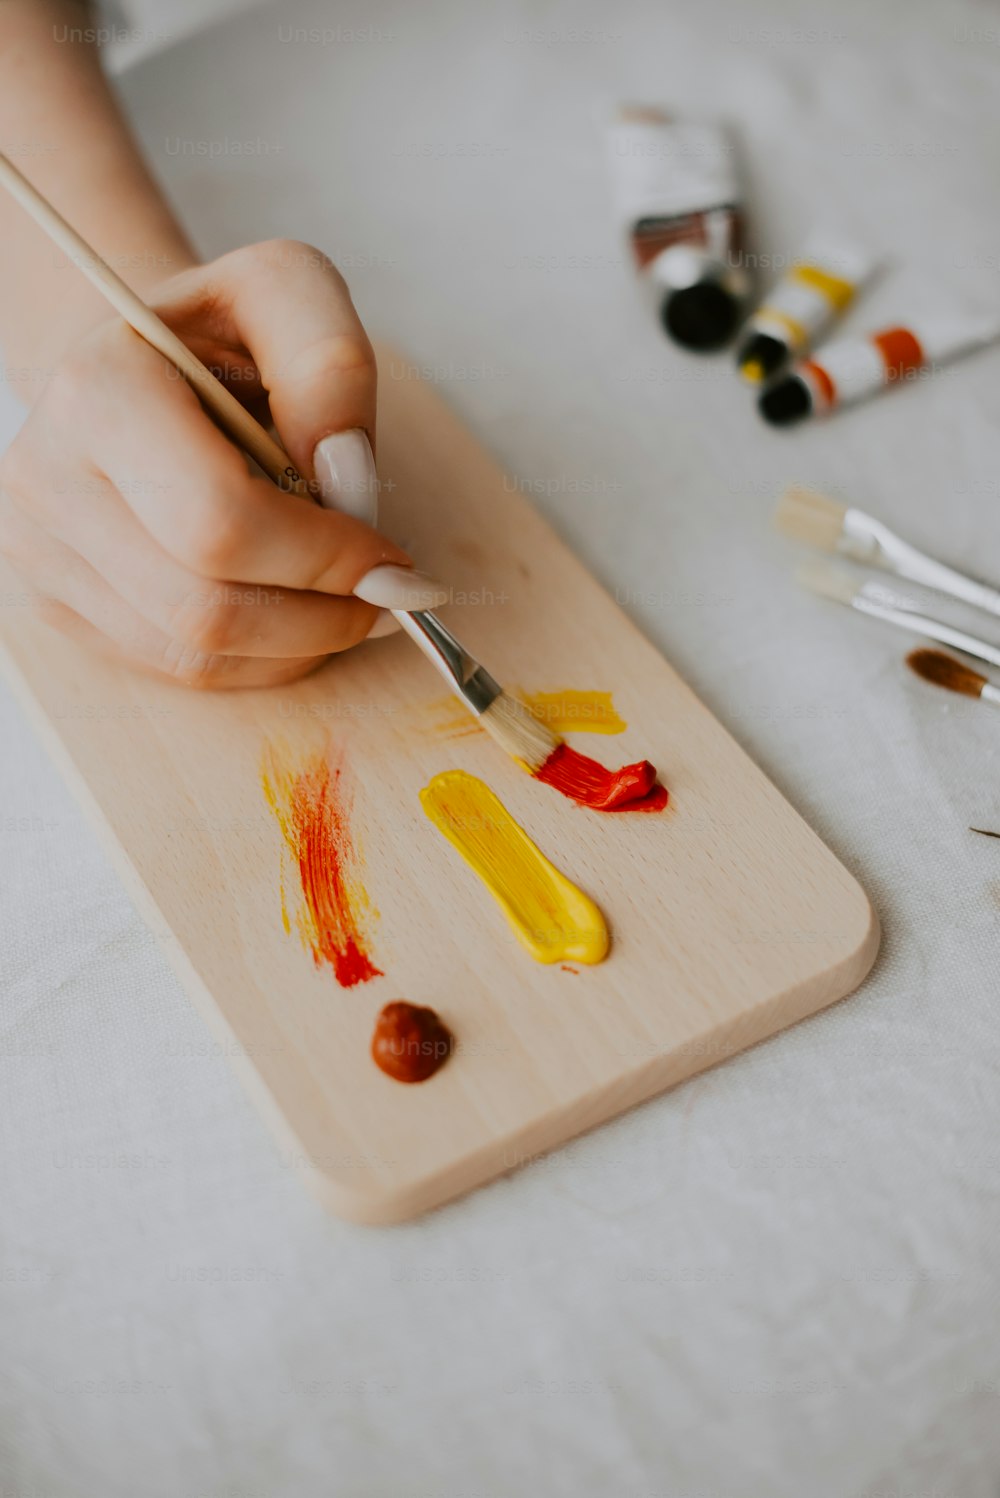 a person is painting on a wooden board